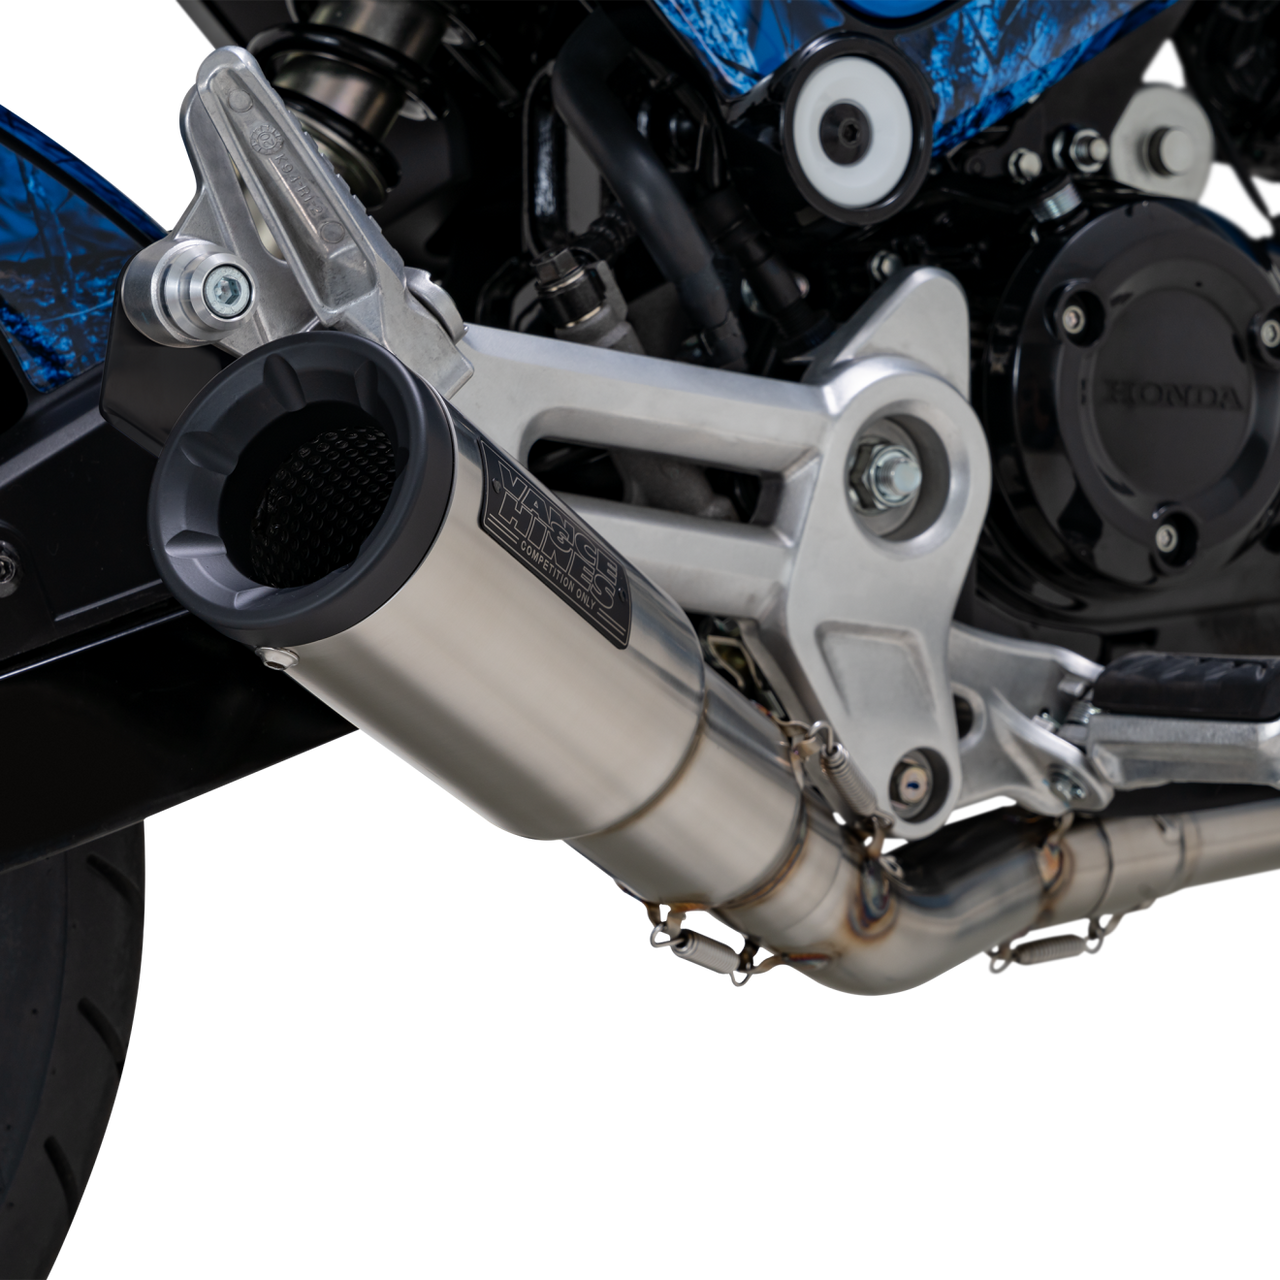 Vance & Hines Hi-Output Hooligan Full System Exhaust - Grom